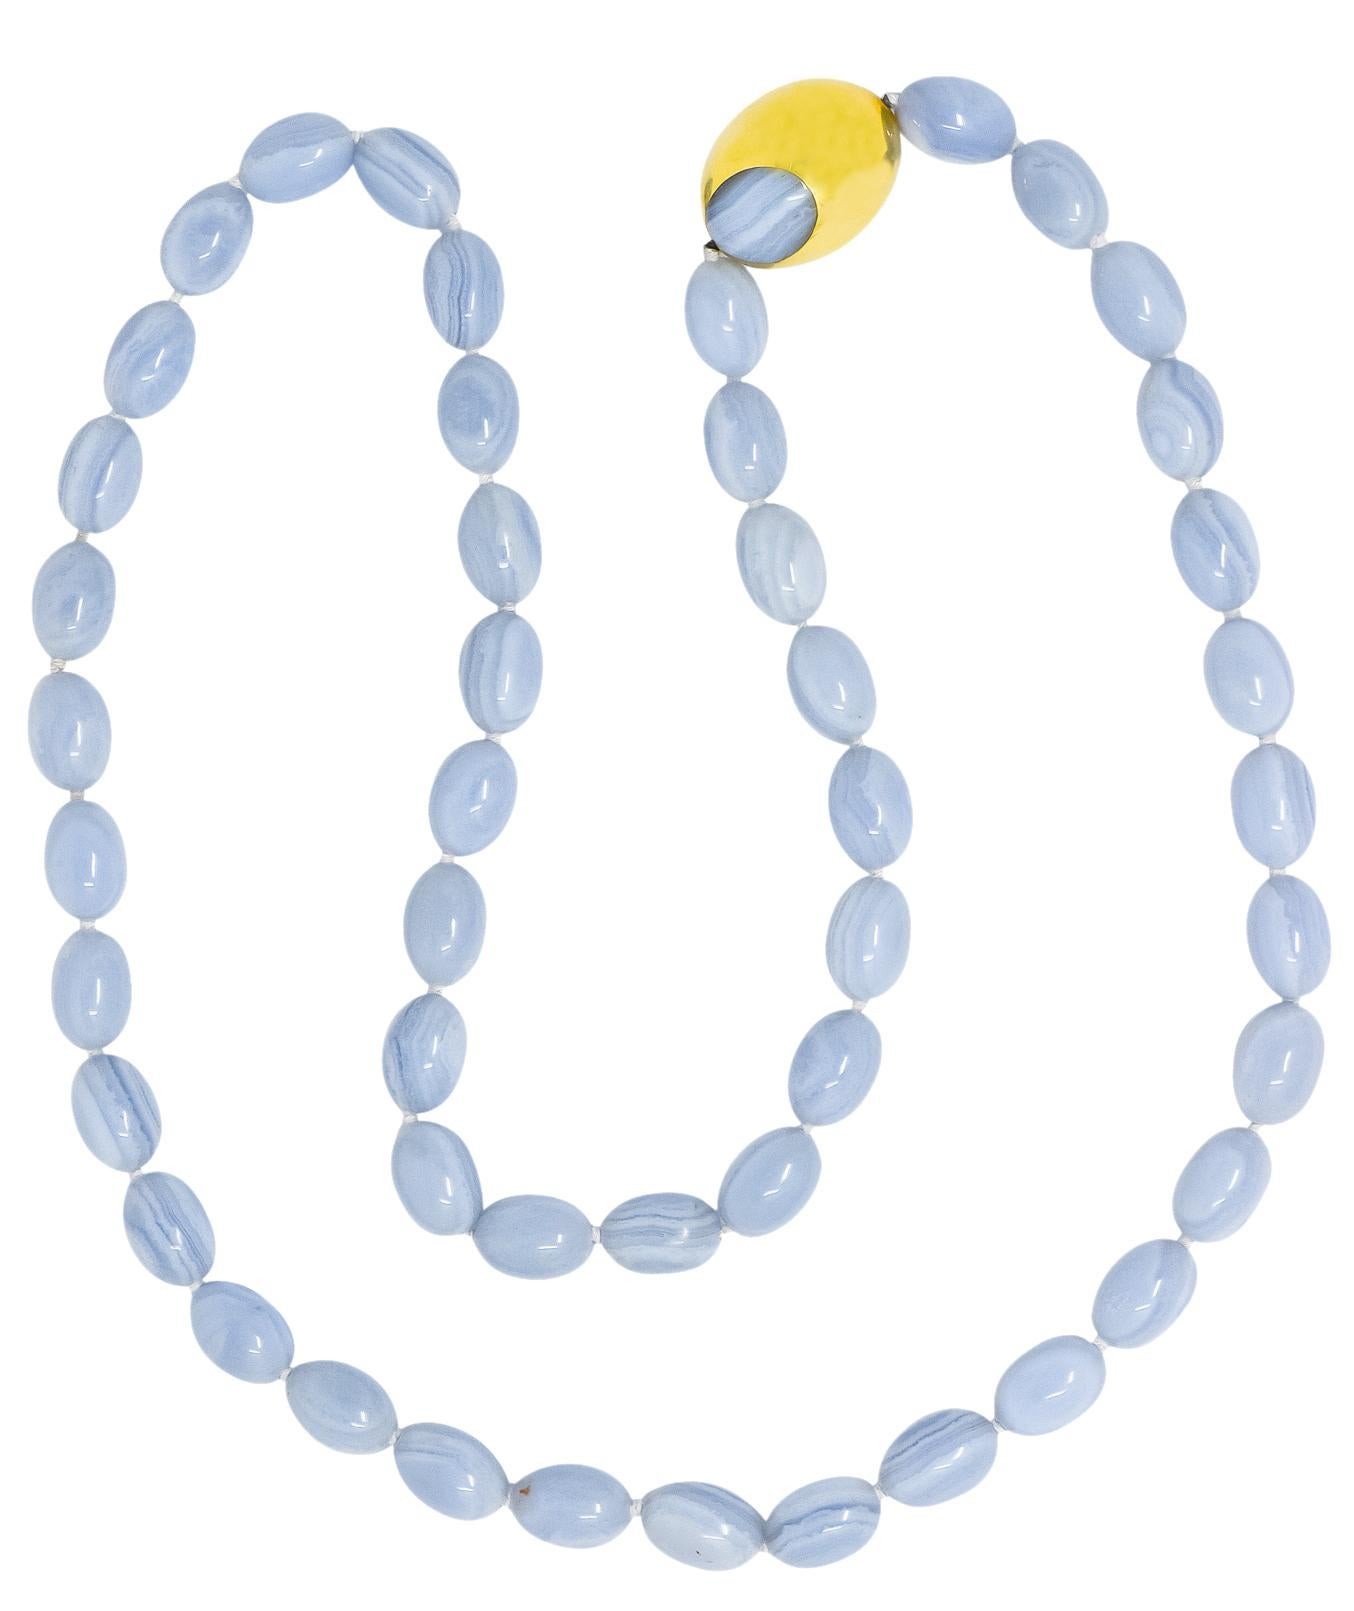 Featuring forty-eight oblong polished blue lace agate beads, measuring approximately 17.0 x 12.0 mm

High polished with swirling light blue and white

With a large hollow oblong gold bead containing two inset oval blue lace agate sections 

Fully